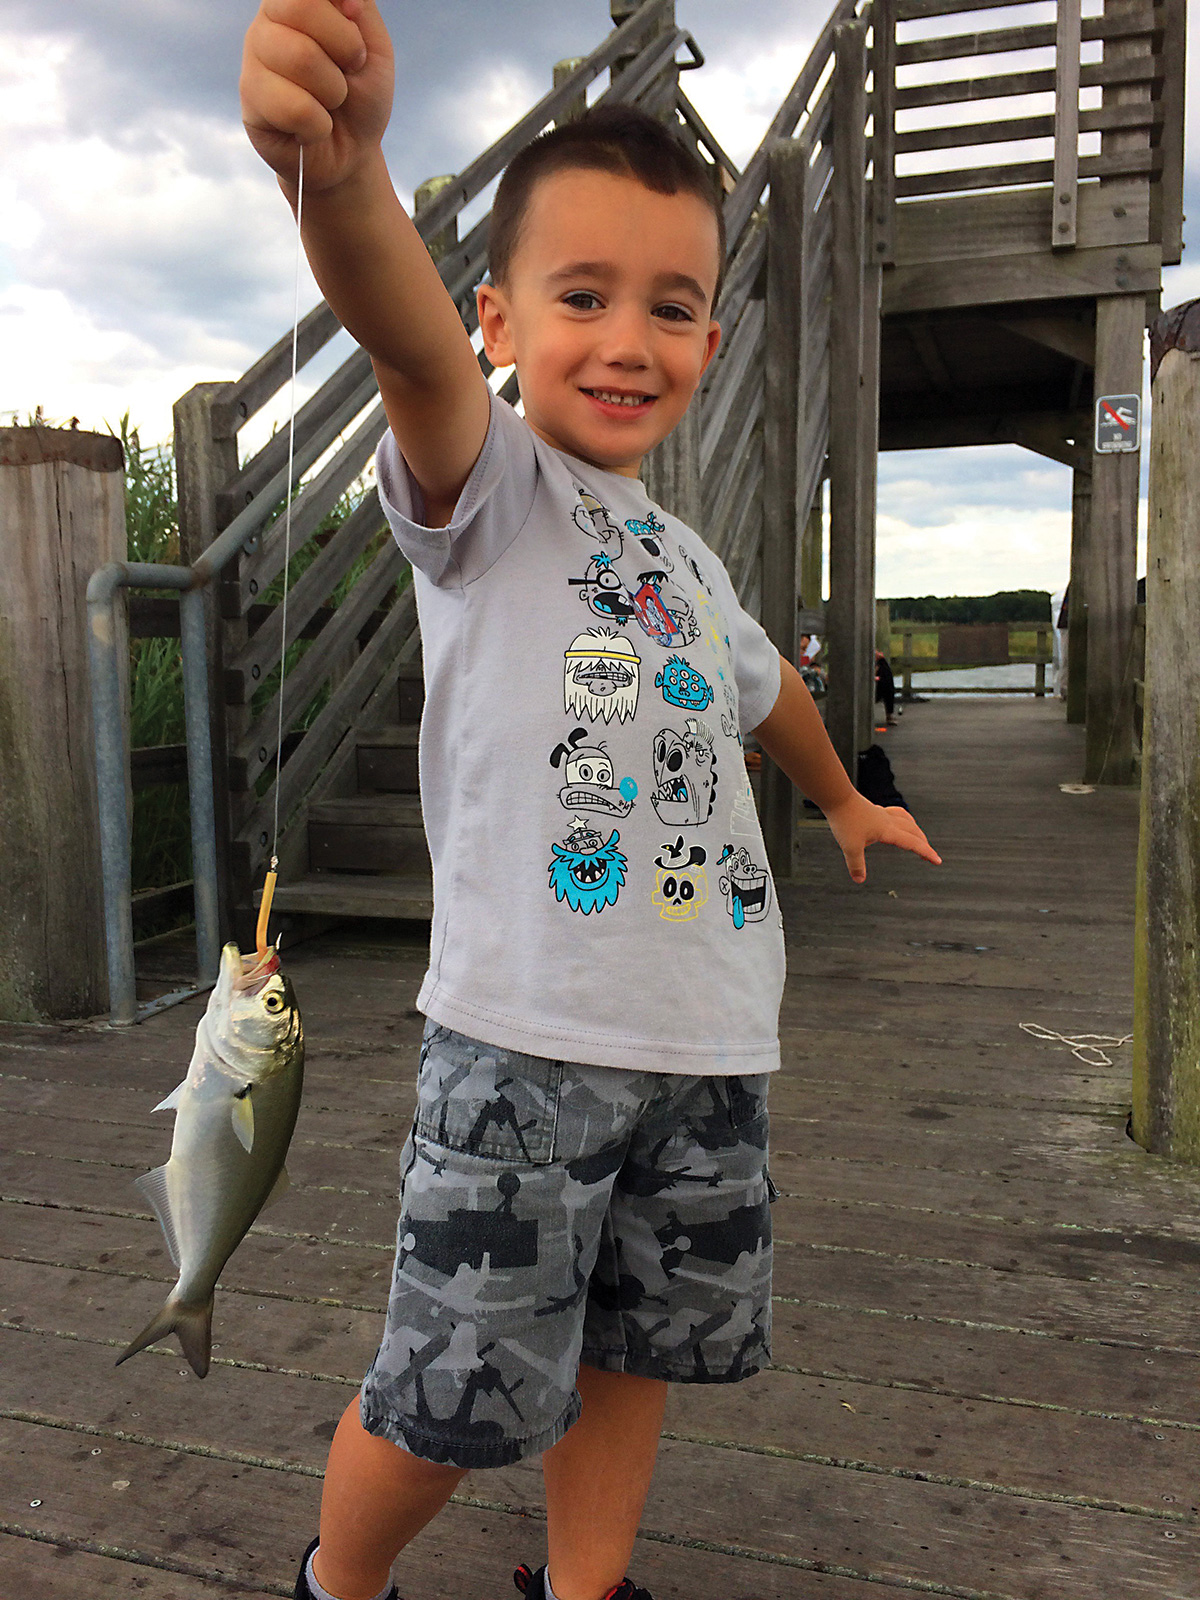 What are some fun ways to catch small fish? Do you need a fishing